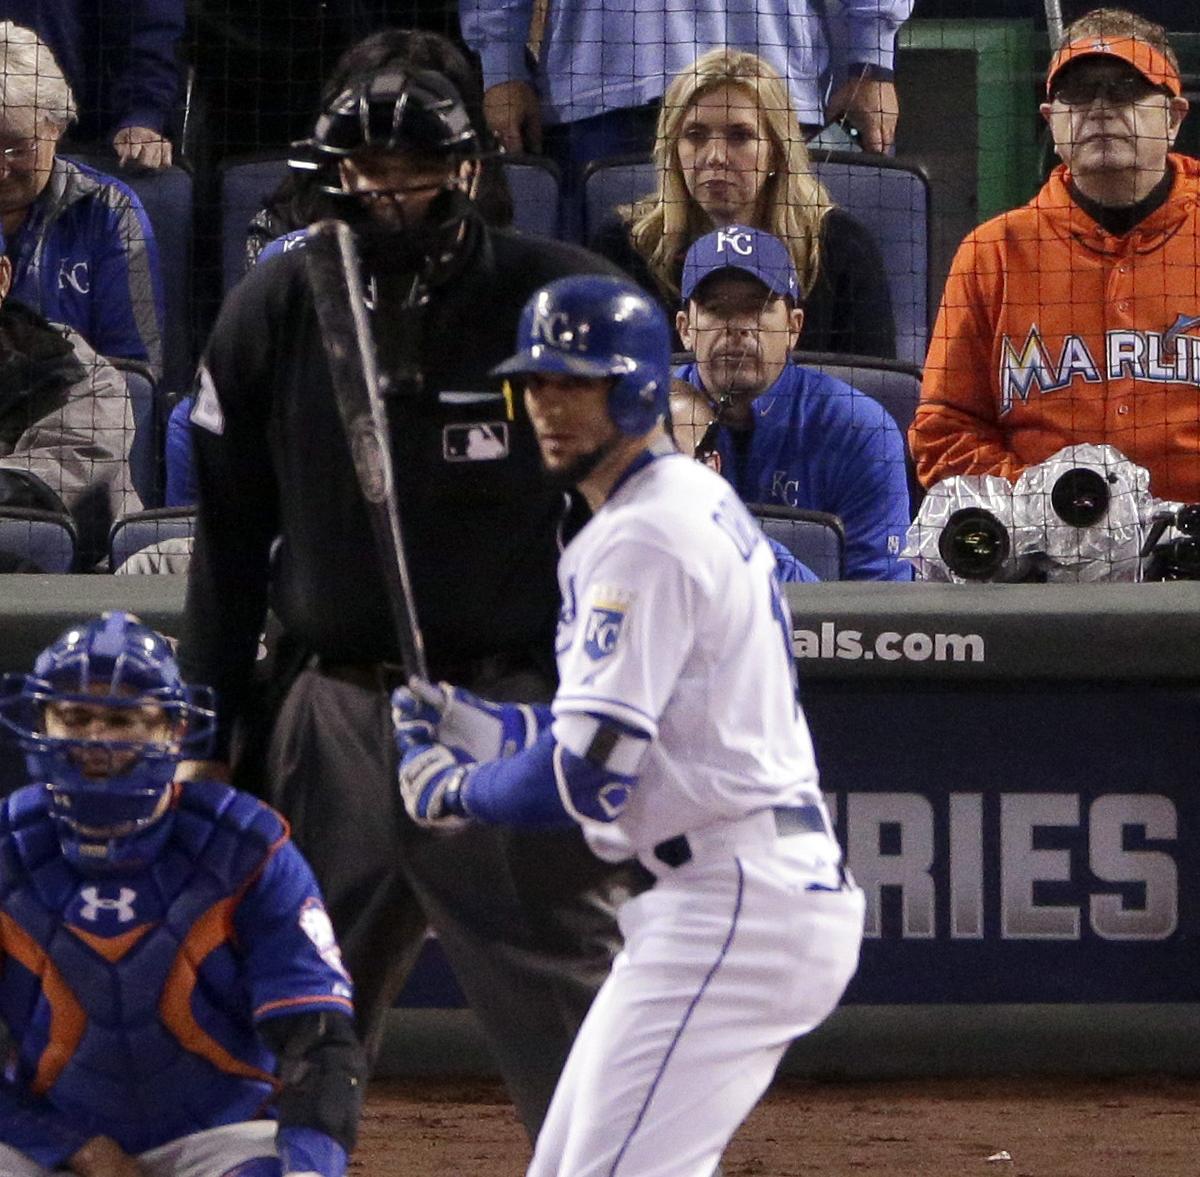 Marlins Man' Laurence Leavy Won't Attend Home Games, Seeks New